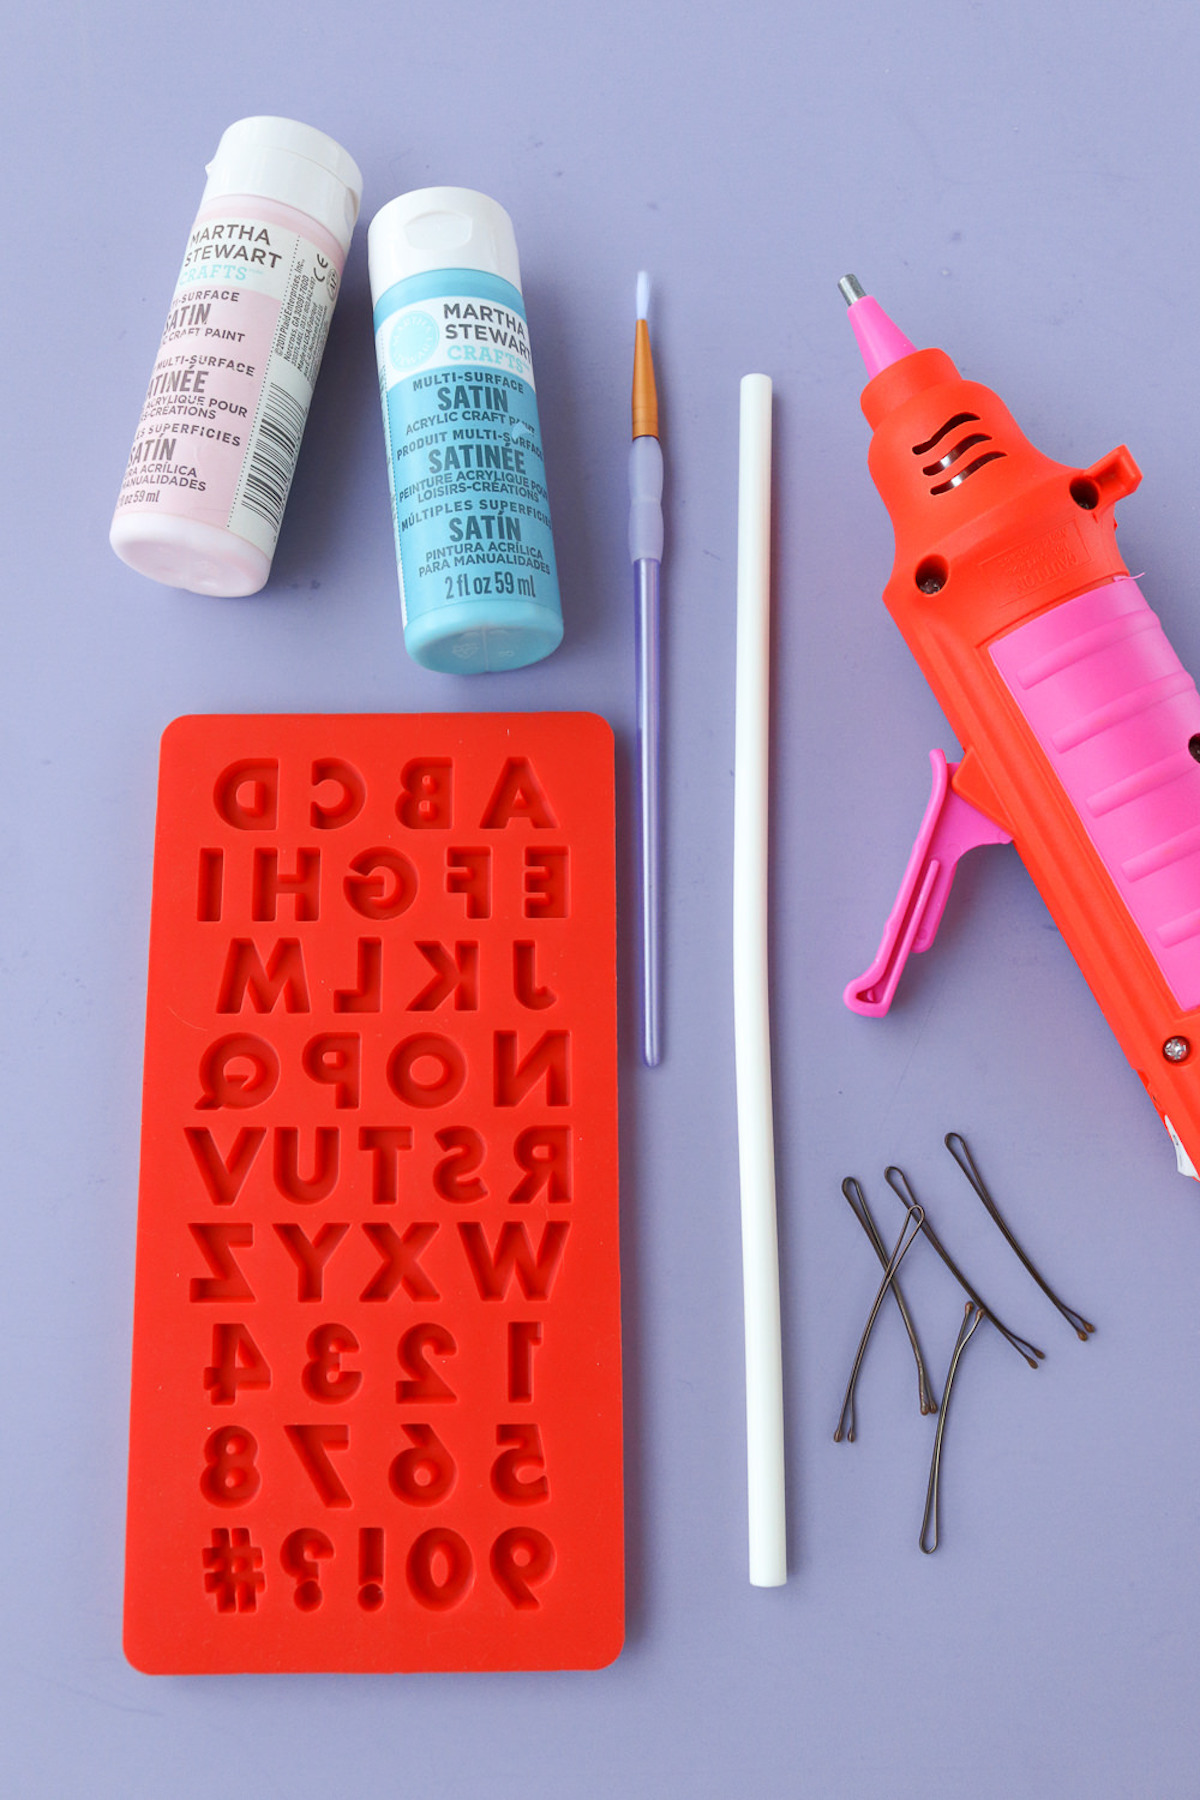 Silicone mold, paint, paintbrush, glue gun, glue stick, and bobby pins